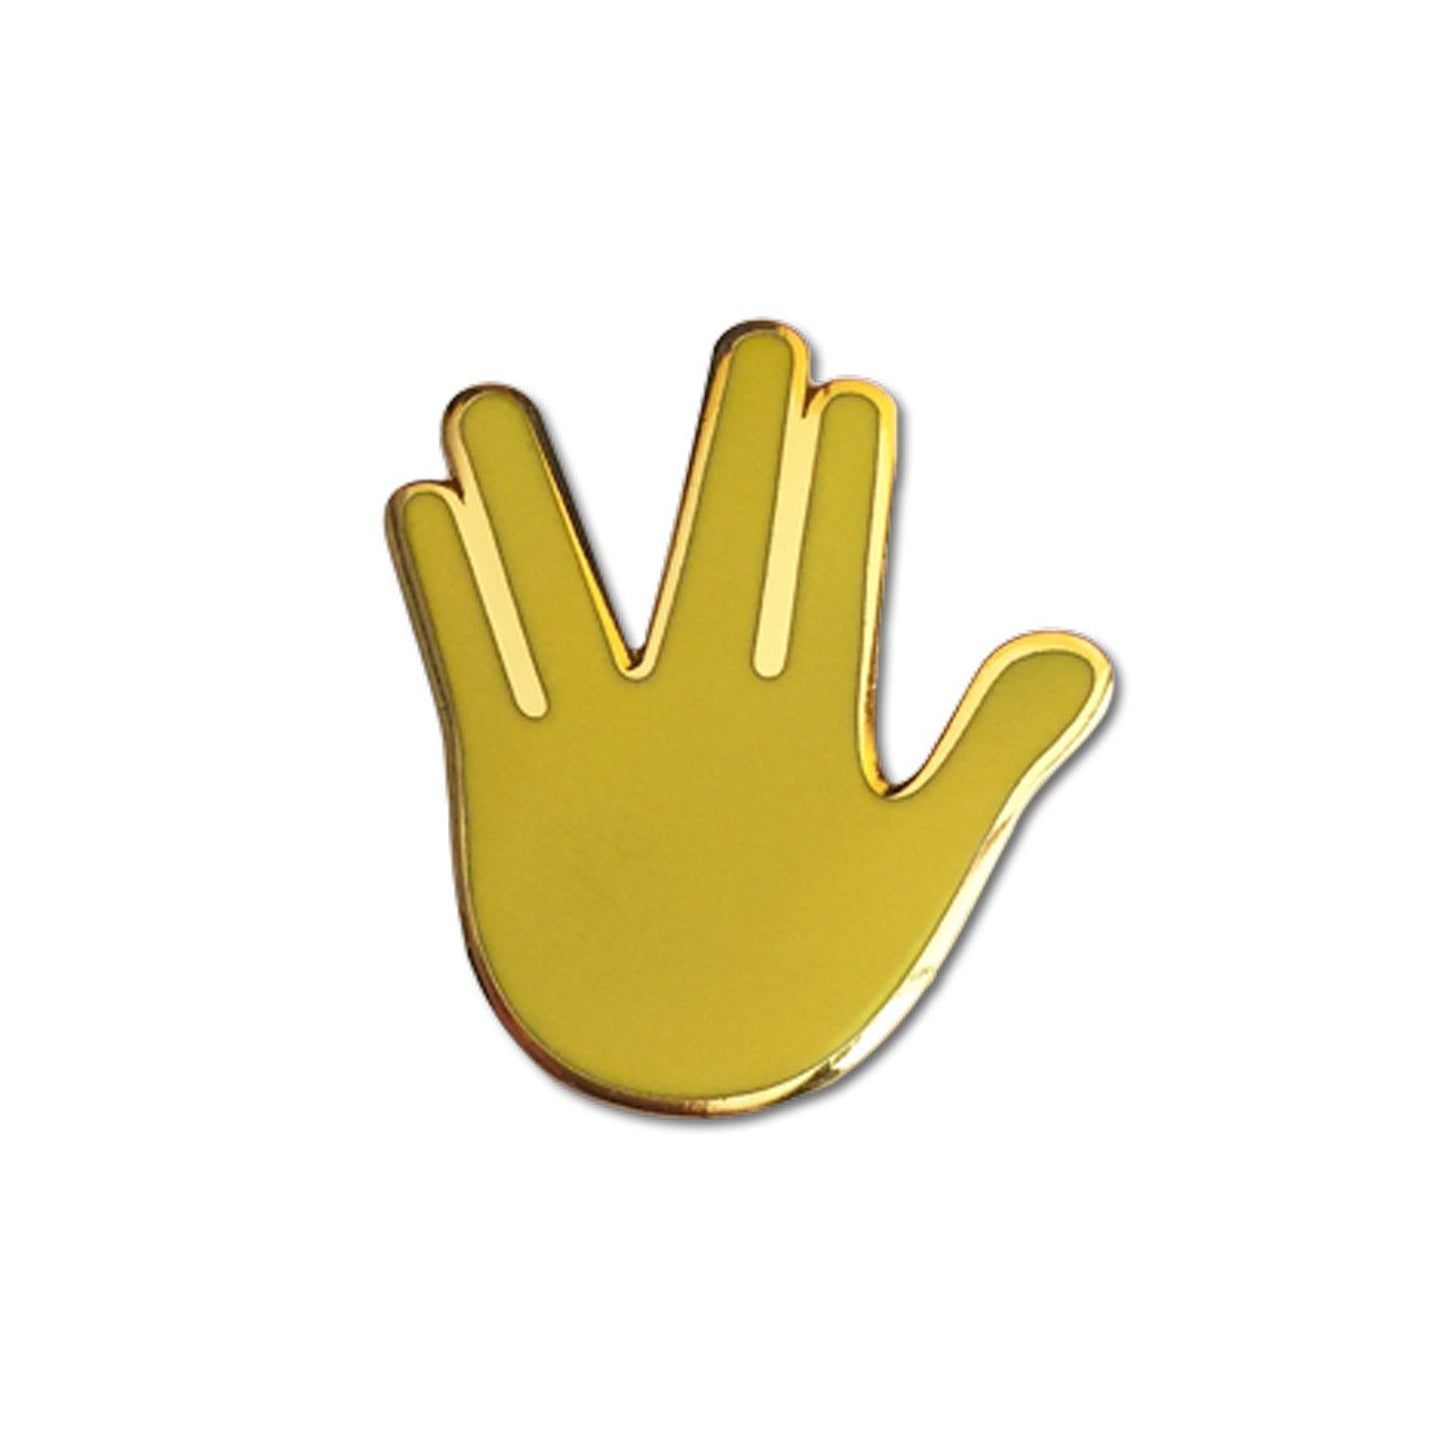 Live Long and Prosper Pin